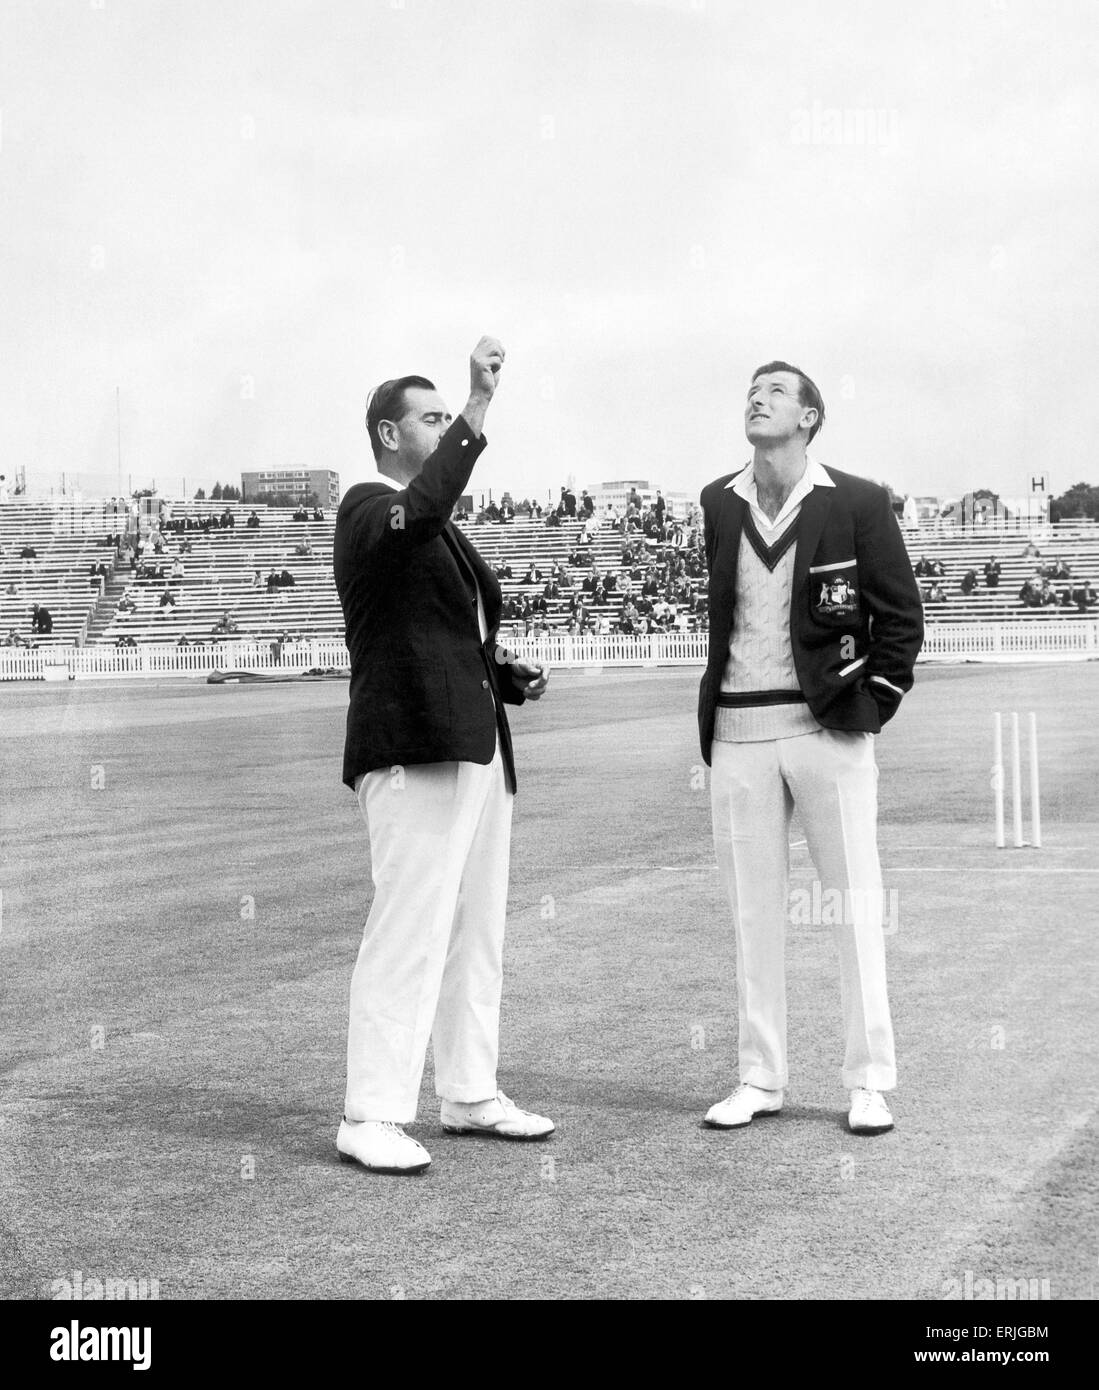 Australian cricket tour of England for the Ashes. England v Australia 3rd Test at Edgbaston. Colin Cowdrey's luck holds as he wins the toss against Australia captain Bill Lawry lbefore the match. 12th July 1968. Stock Photo